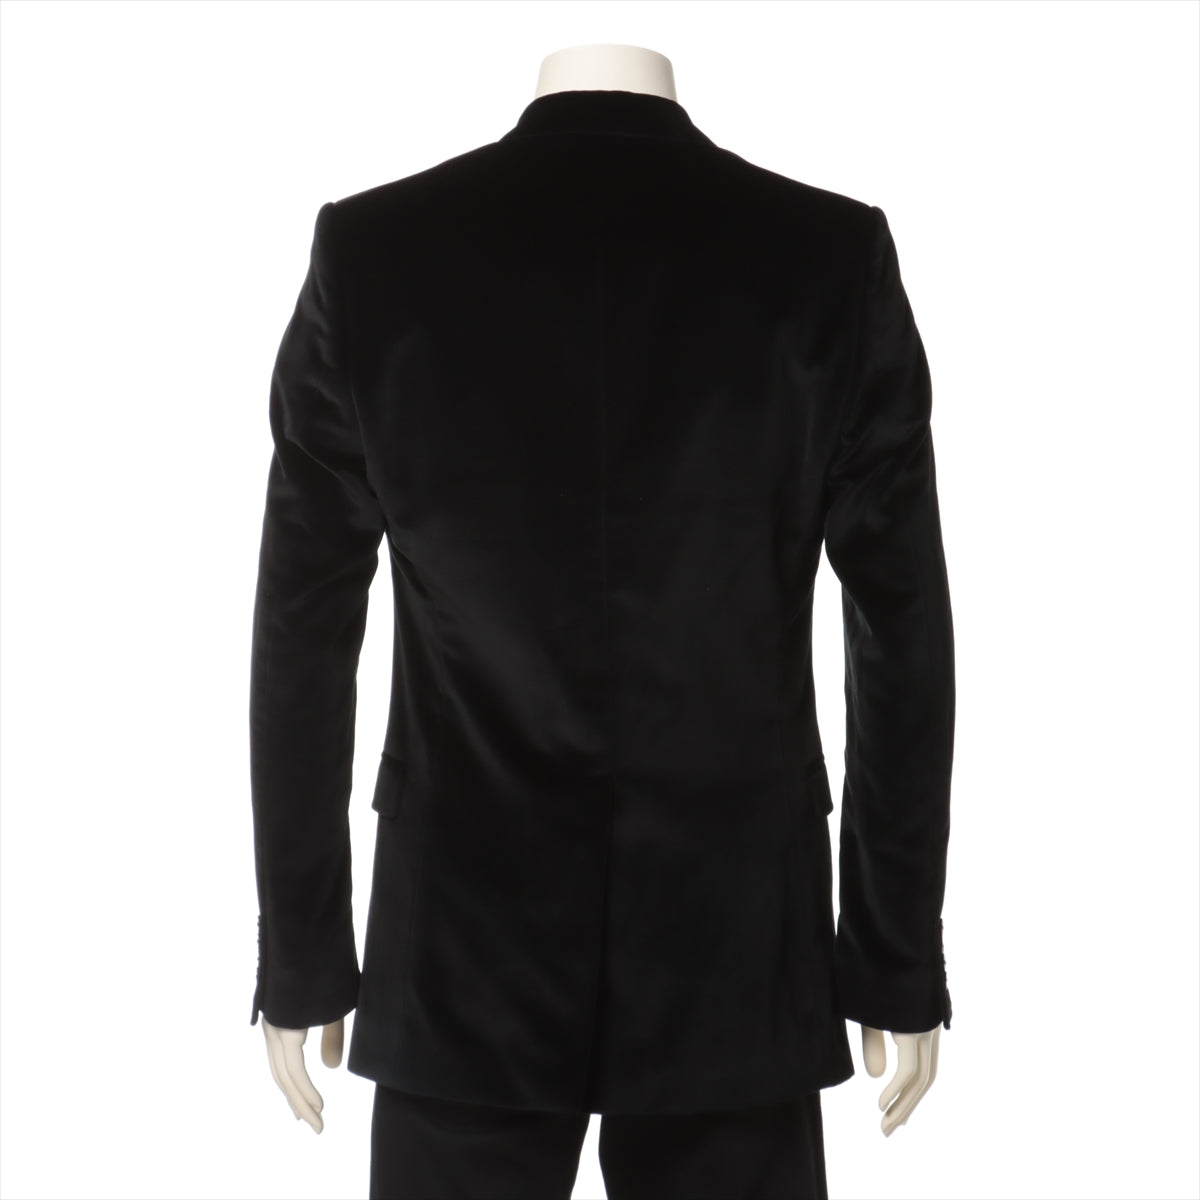 Dolce & Gabbana Cotton Tailored Jacket 46 Men's Black  Velour G2614T Stains on the side Lining Tsure